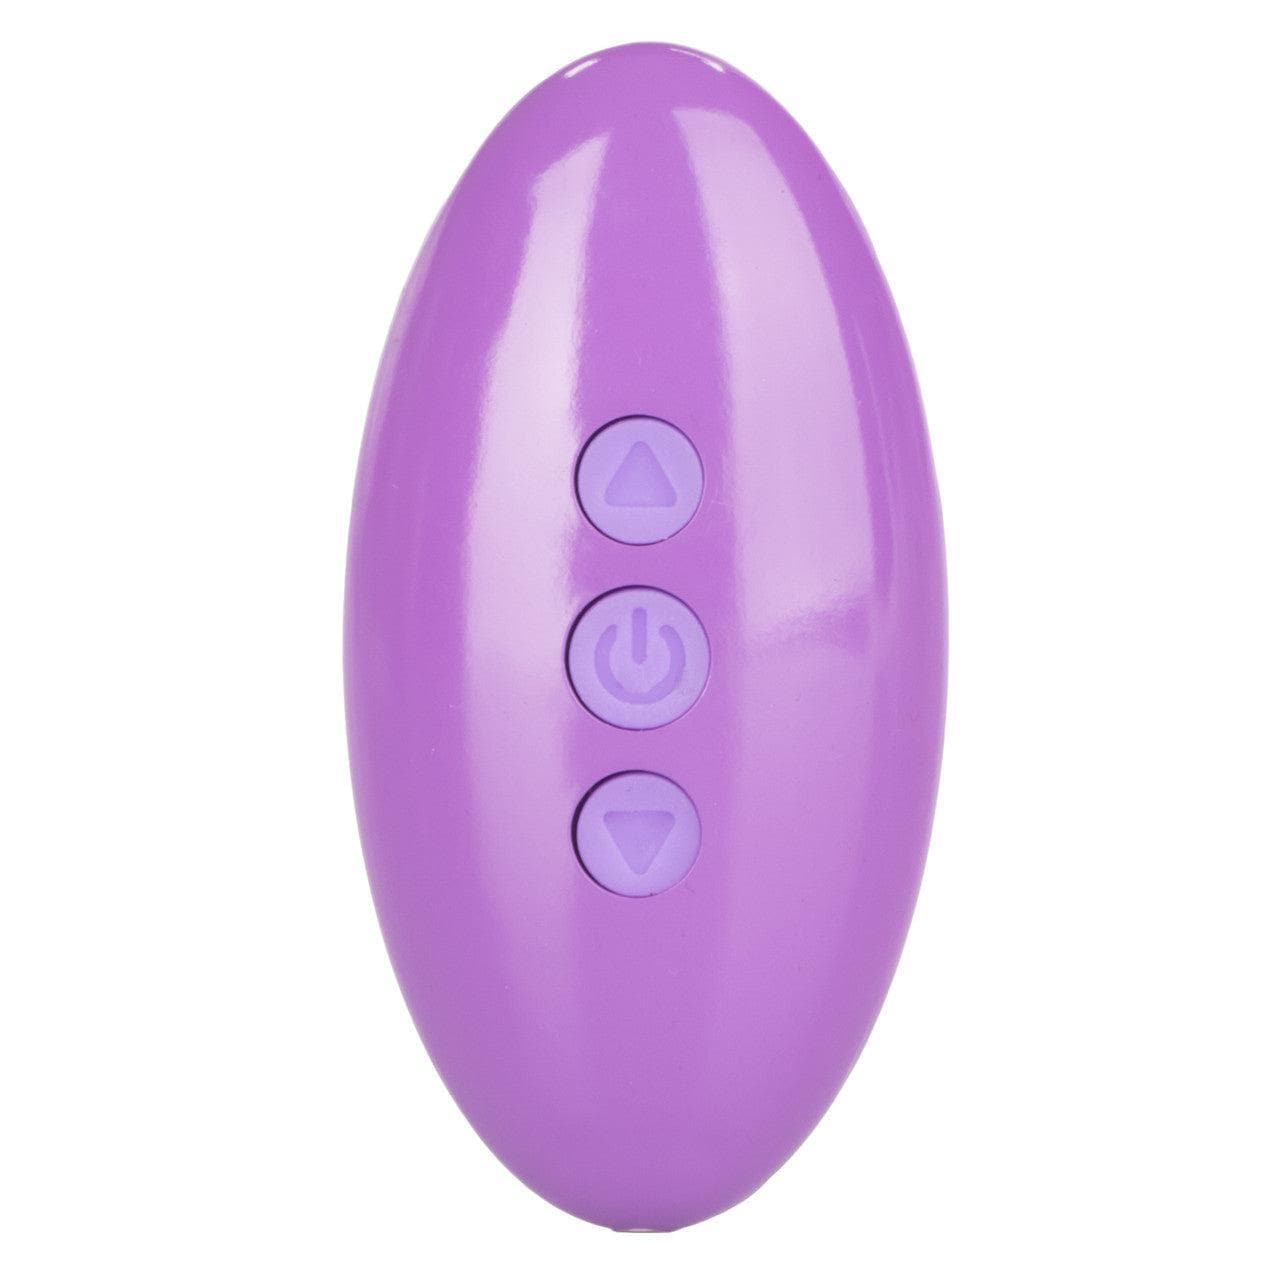 Venus Butterfly Silicone Remote Control Venus USB Rechargeable 10 Function Vibrator picture picture